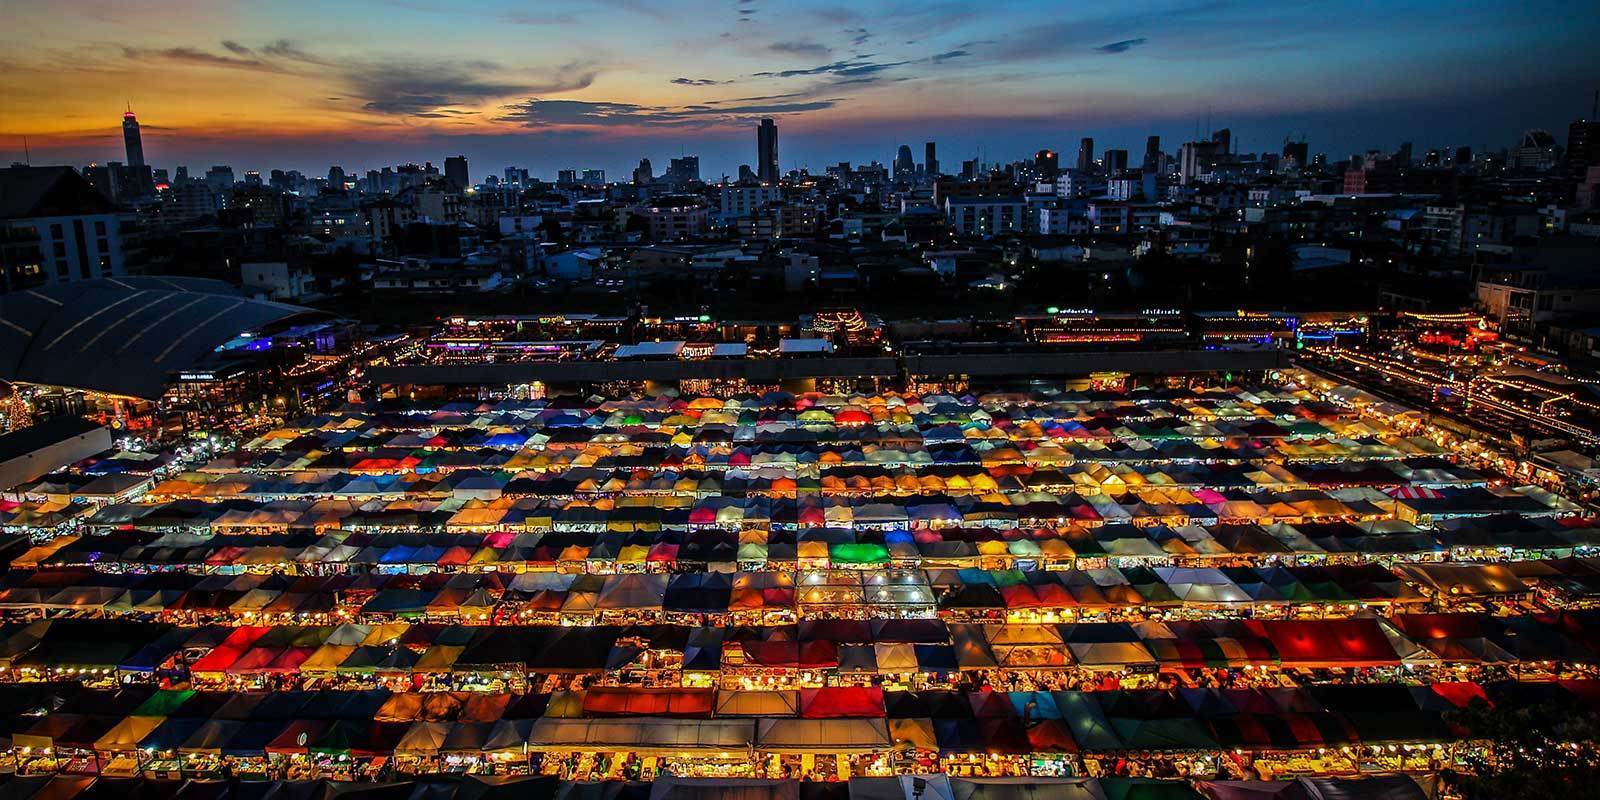 YOUR GUIDE TO 5 OF THE BEST NIGHT MARKETS IN THE US